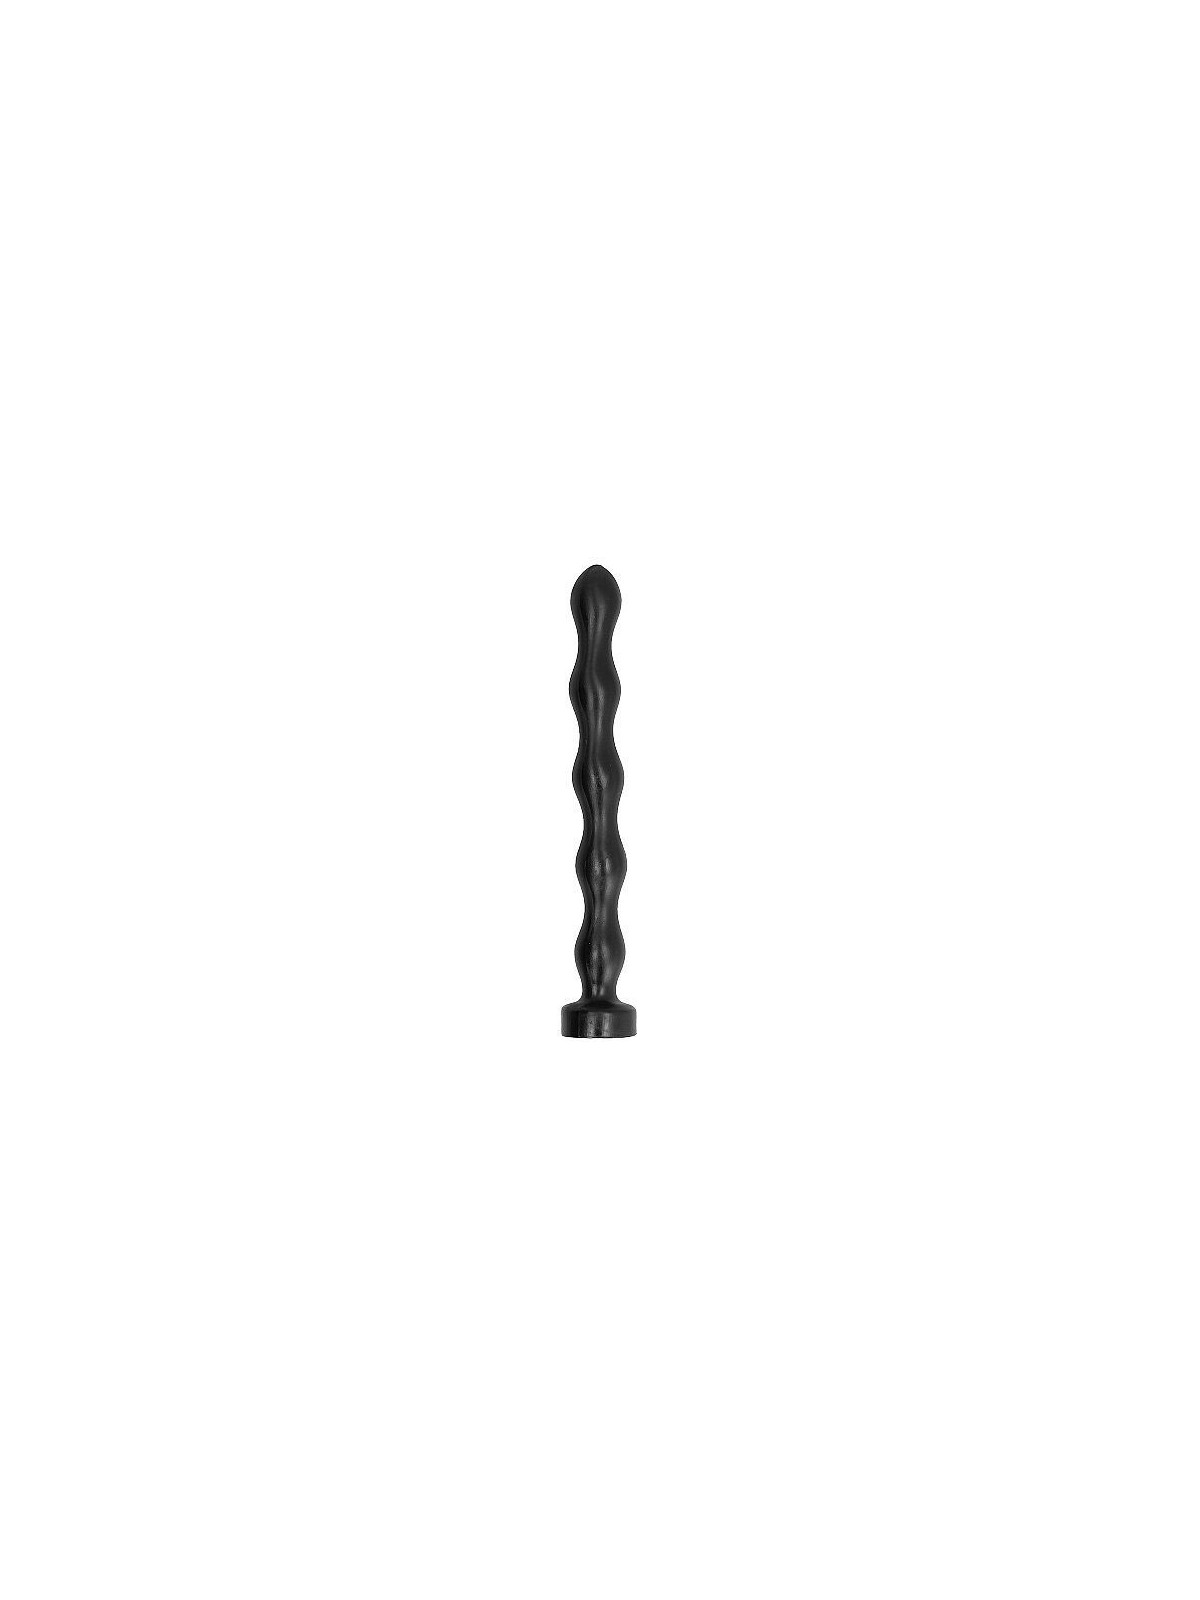 All Black Anal Beads 41,5 cm - Comprar Juguetes fisting All Black - Fisting (1)